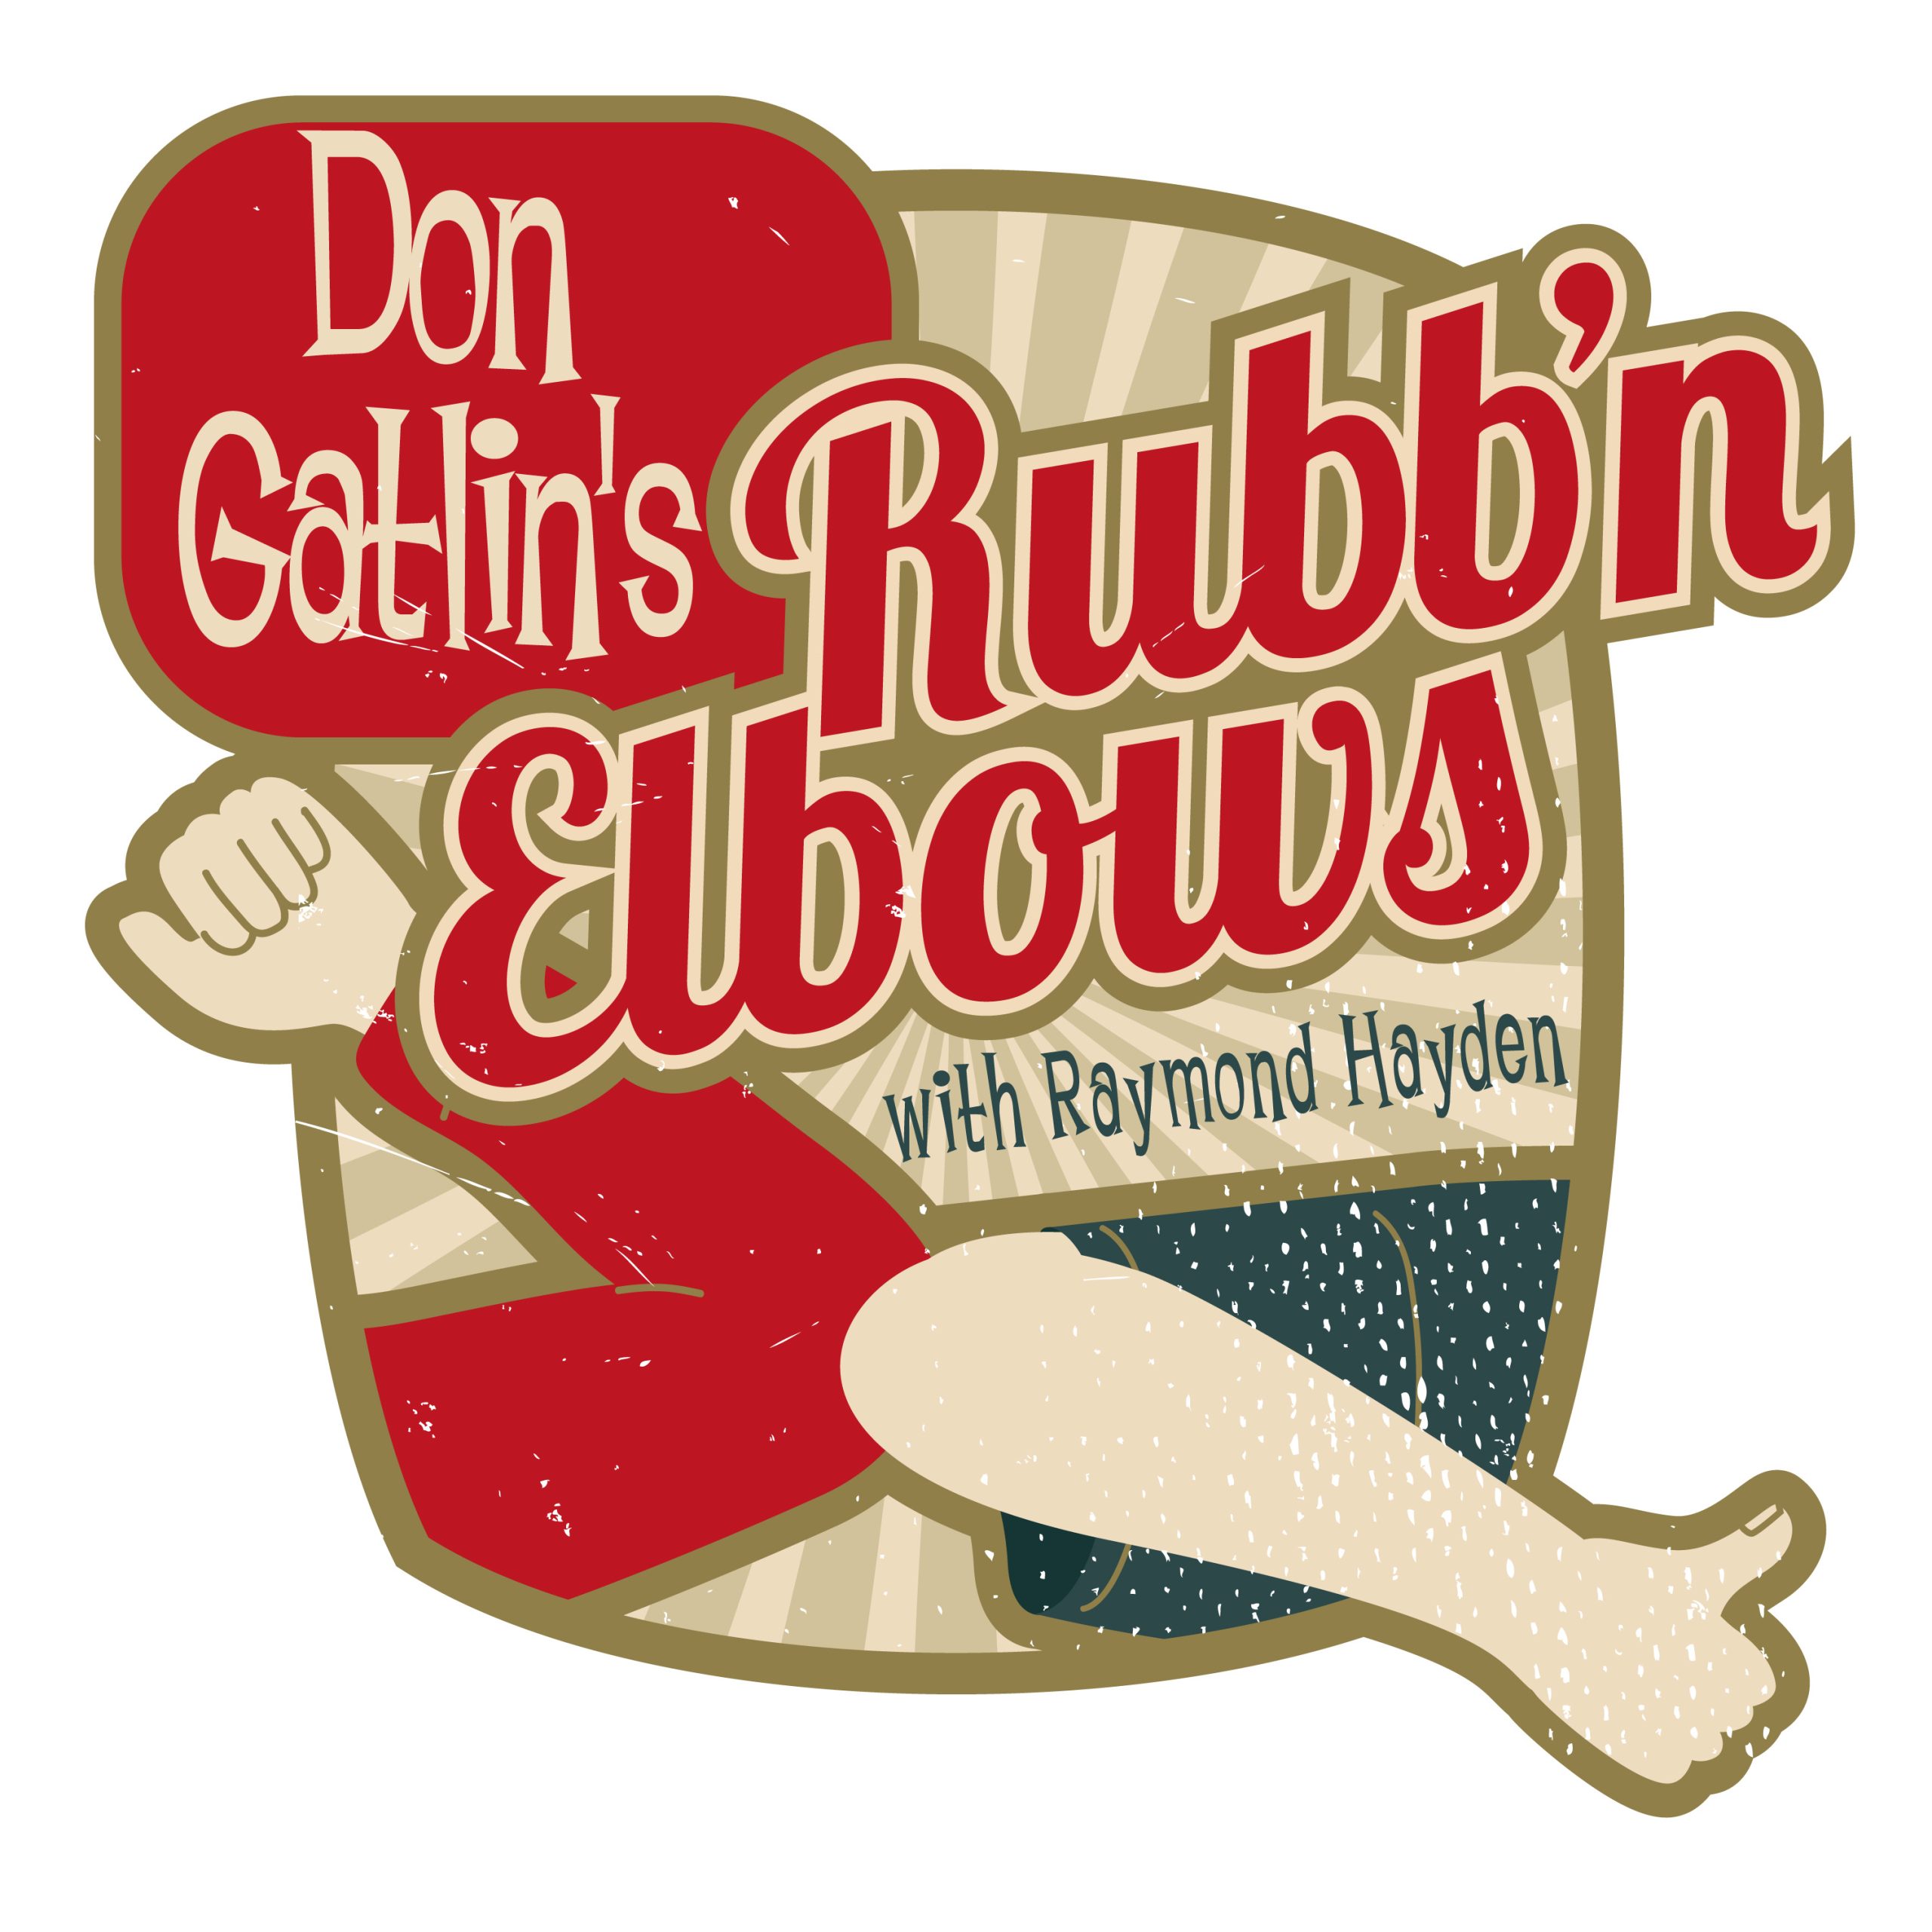 Rubb’n Elbows – Season 1 / Ep 5 with guest Colin Whinnery